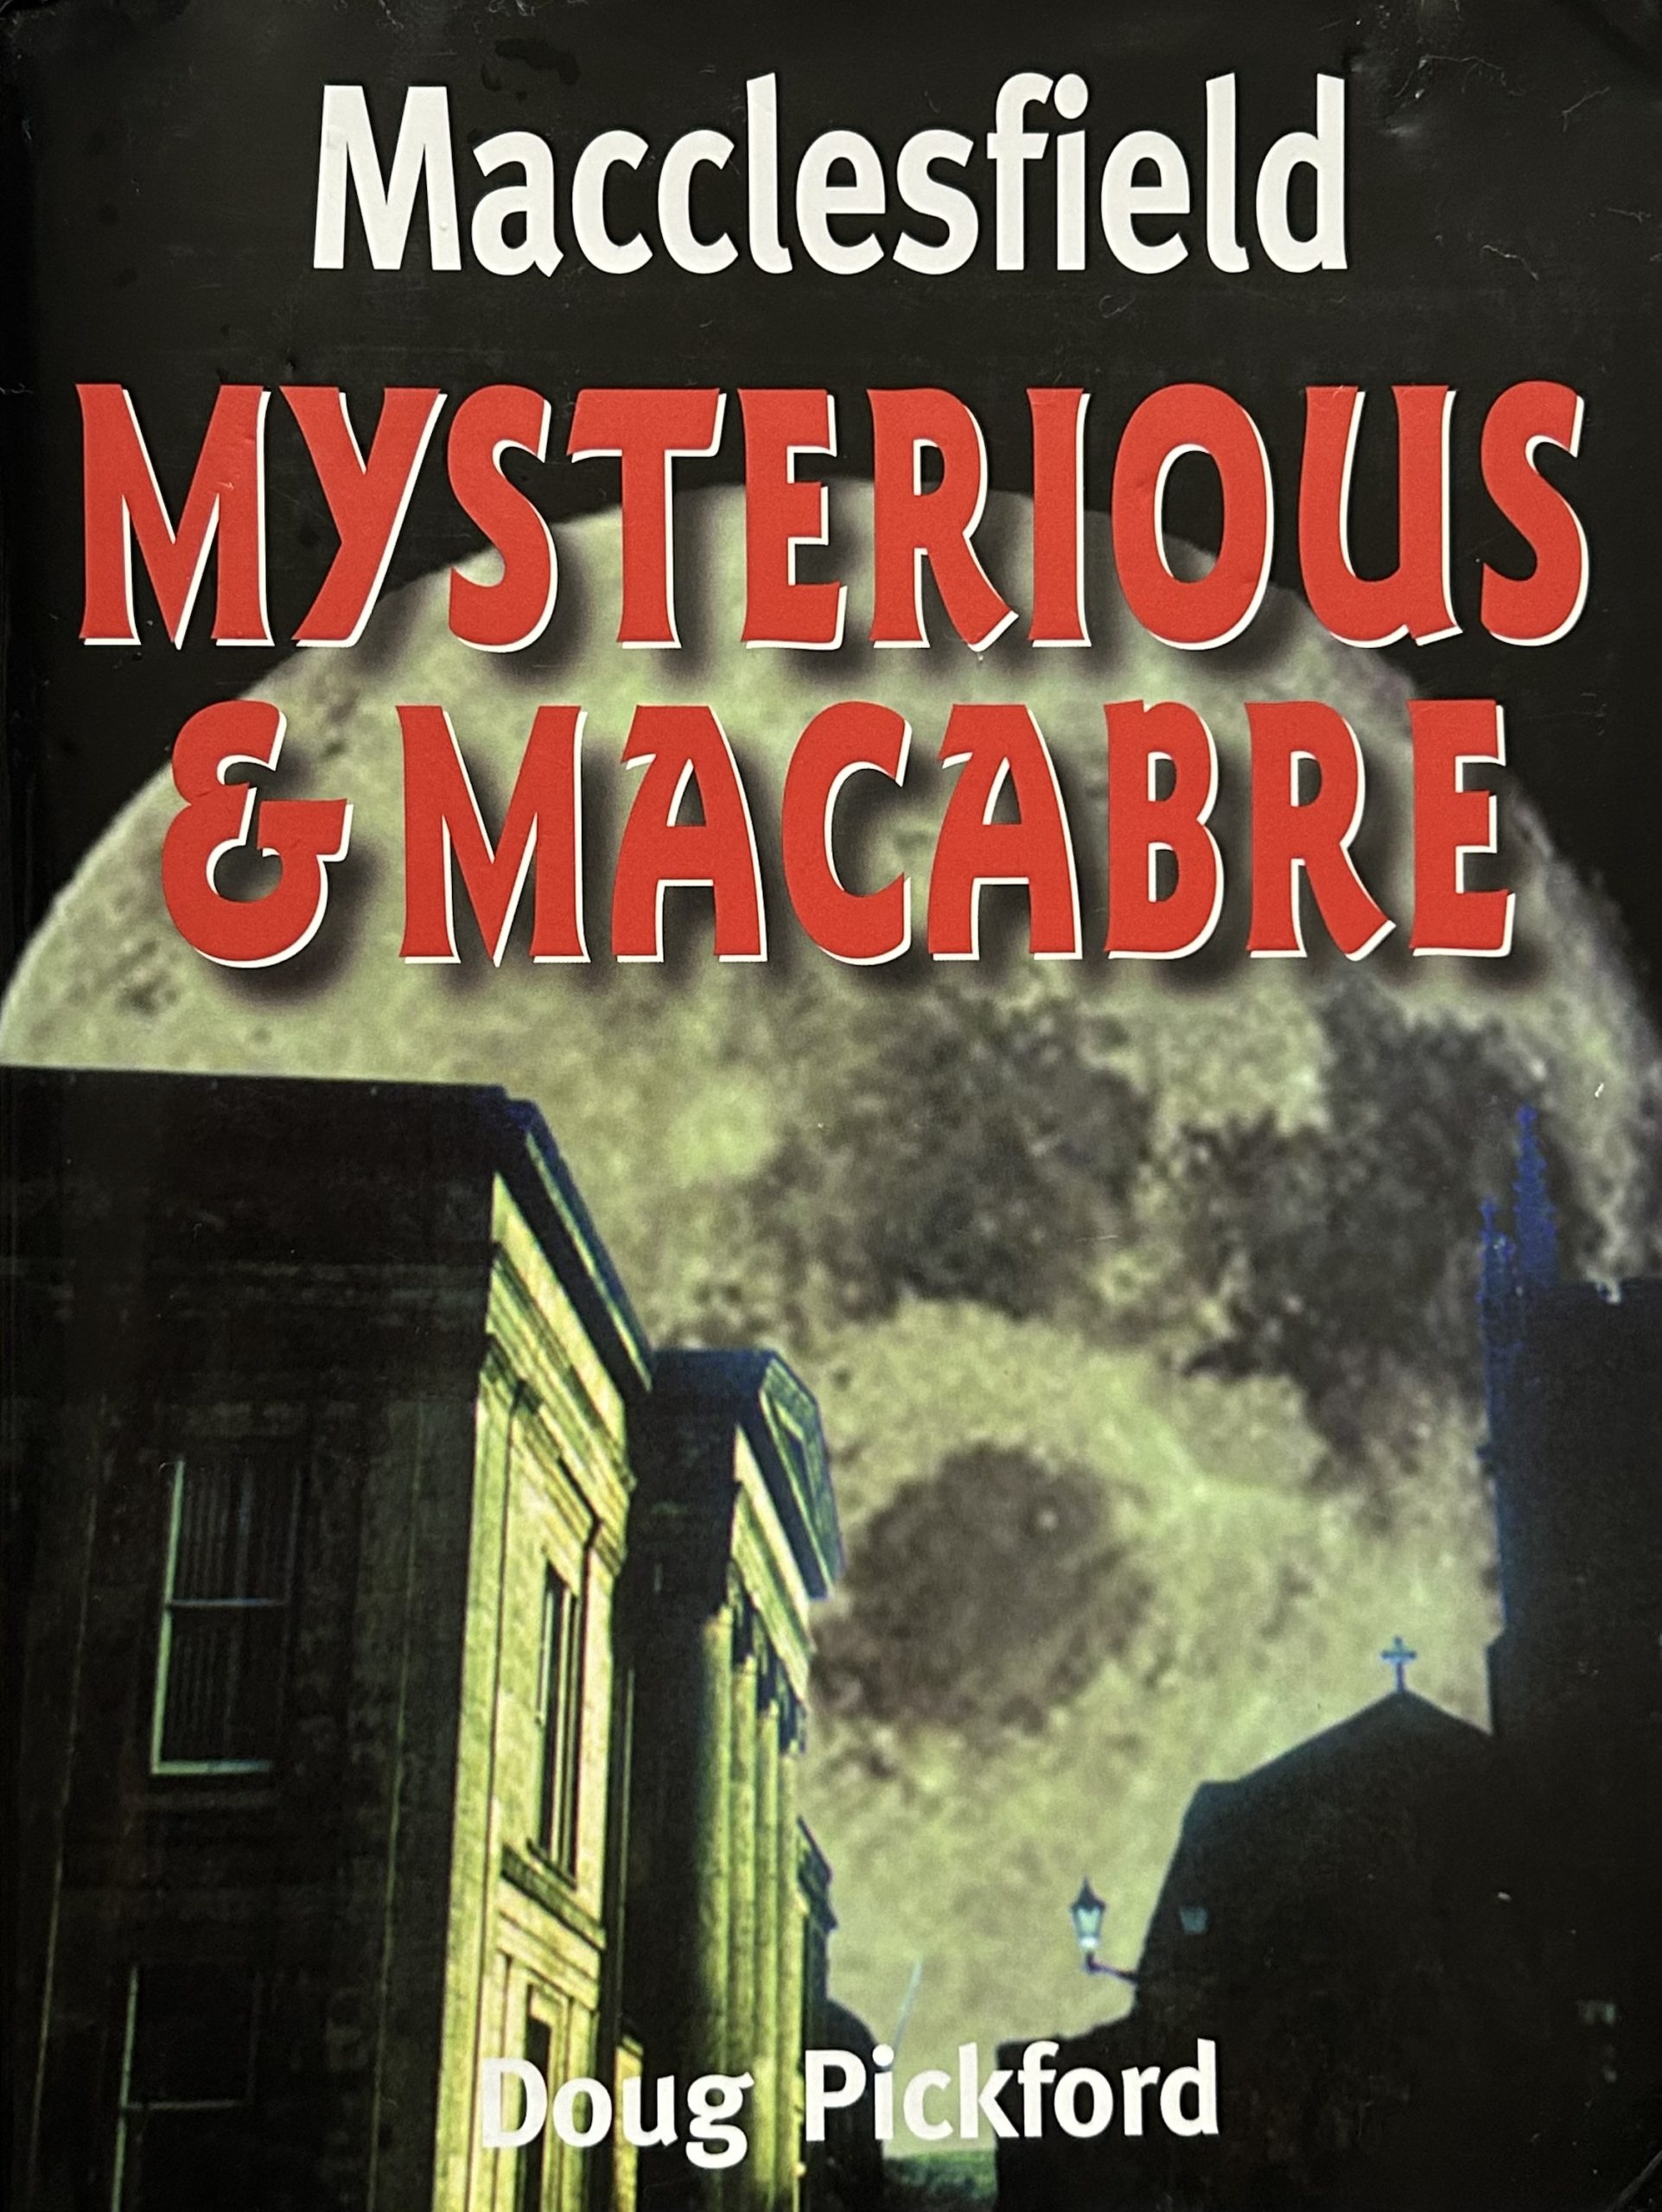 Macclesfield: Mysterious and Macabre by Doug Pickford